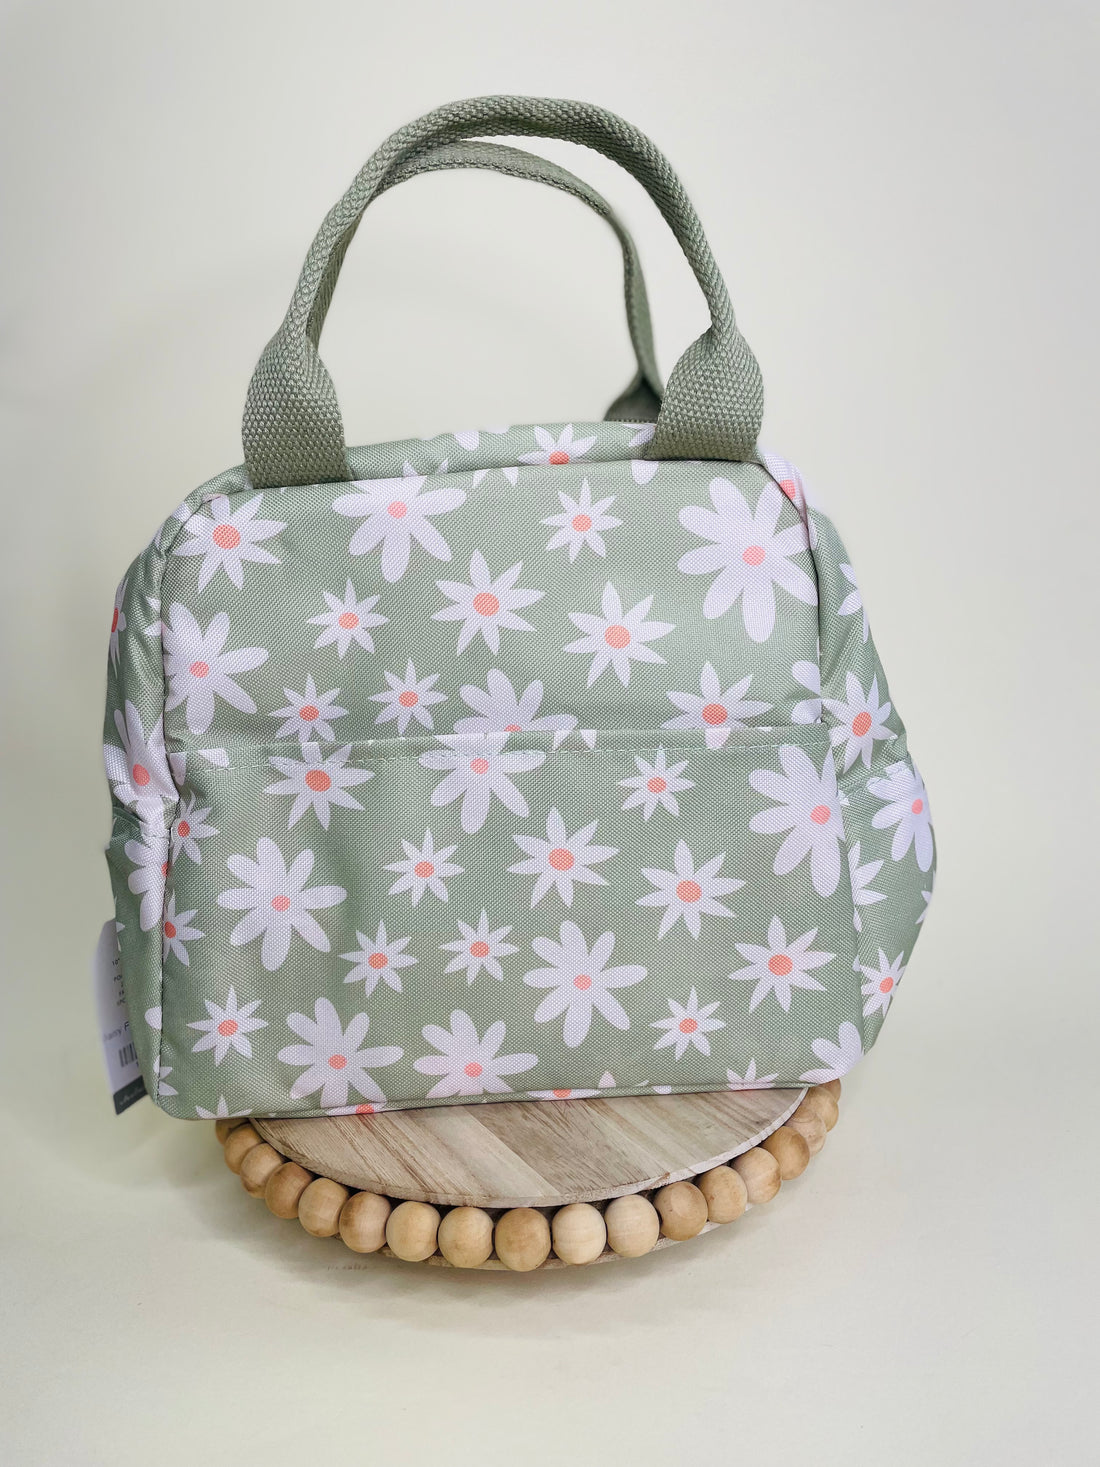 Daisy Floral Lunch Tote